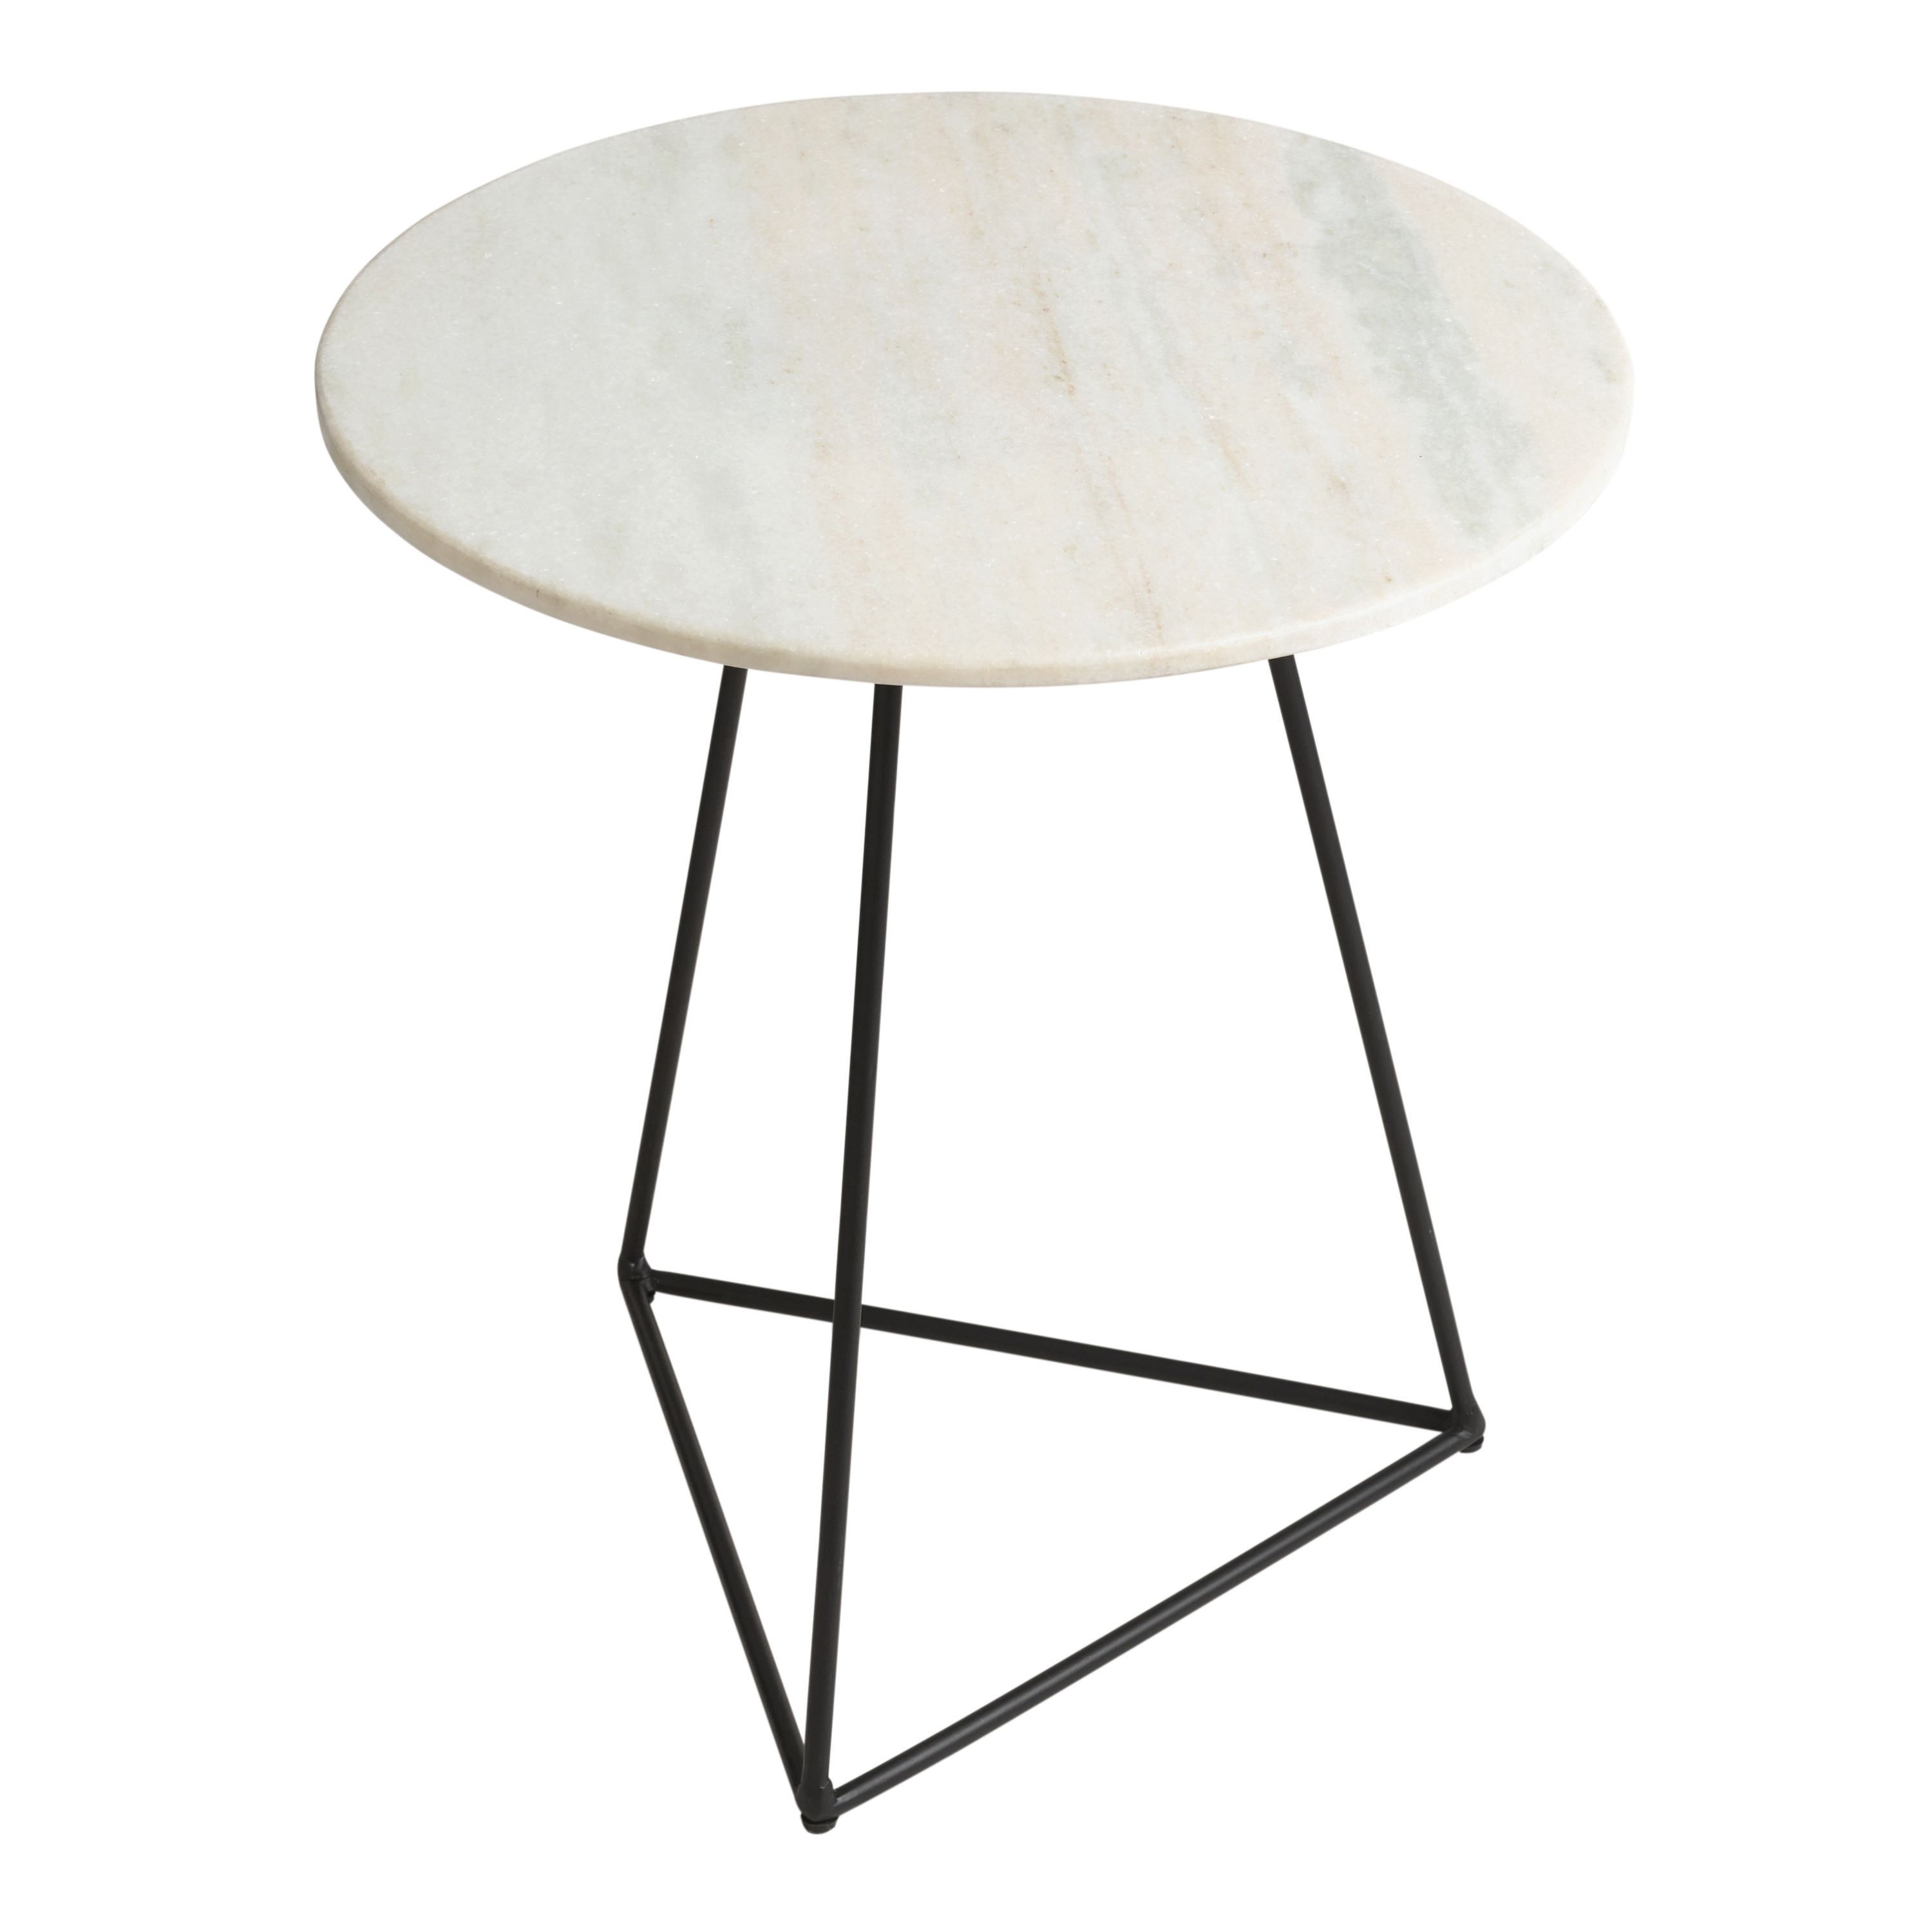 Round White Marble And Black Metal Accent Table | World Market